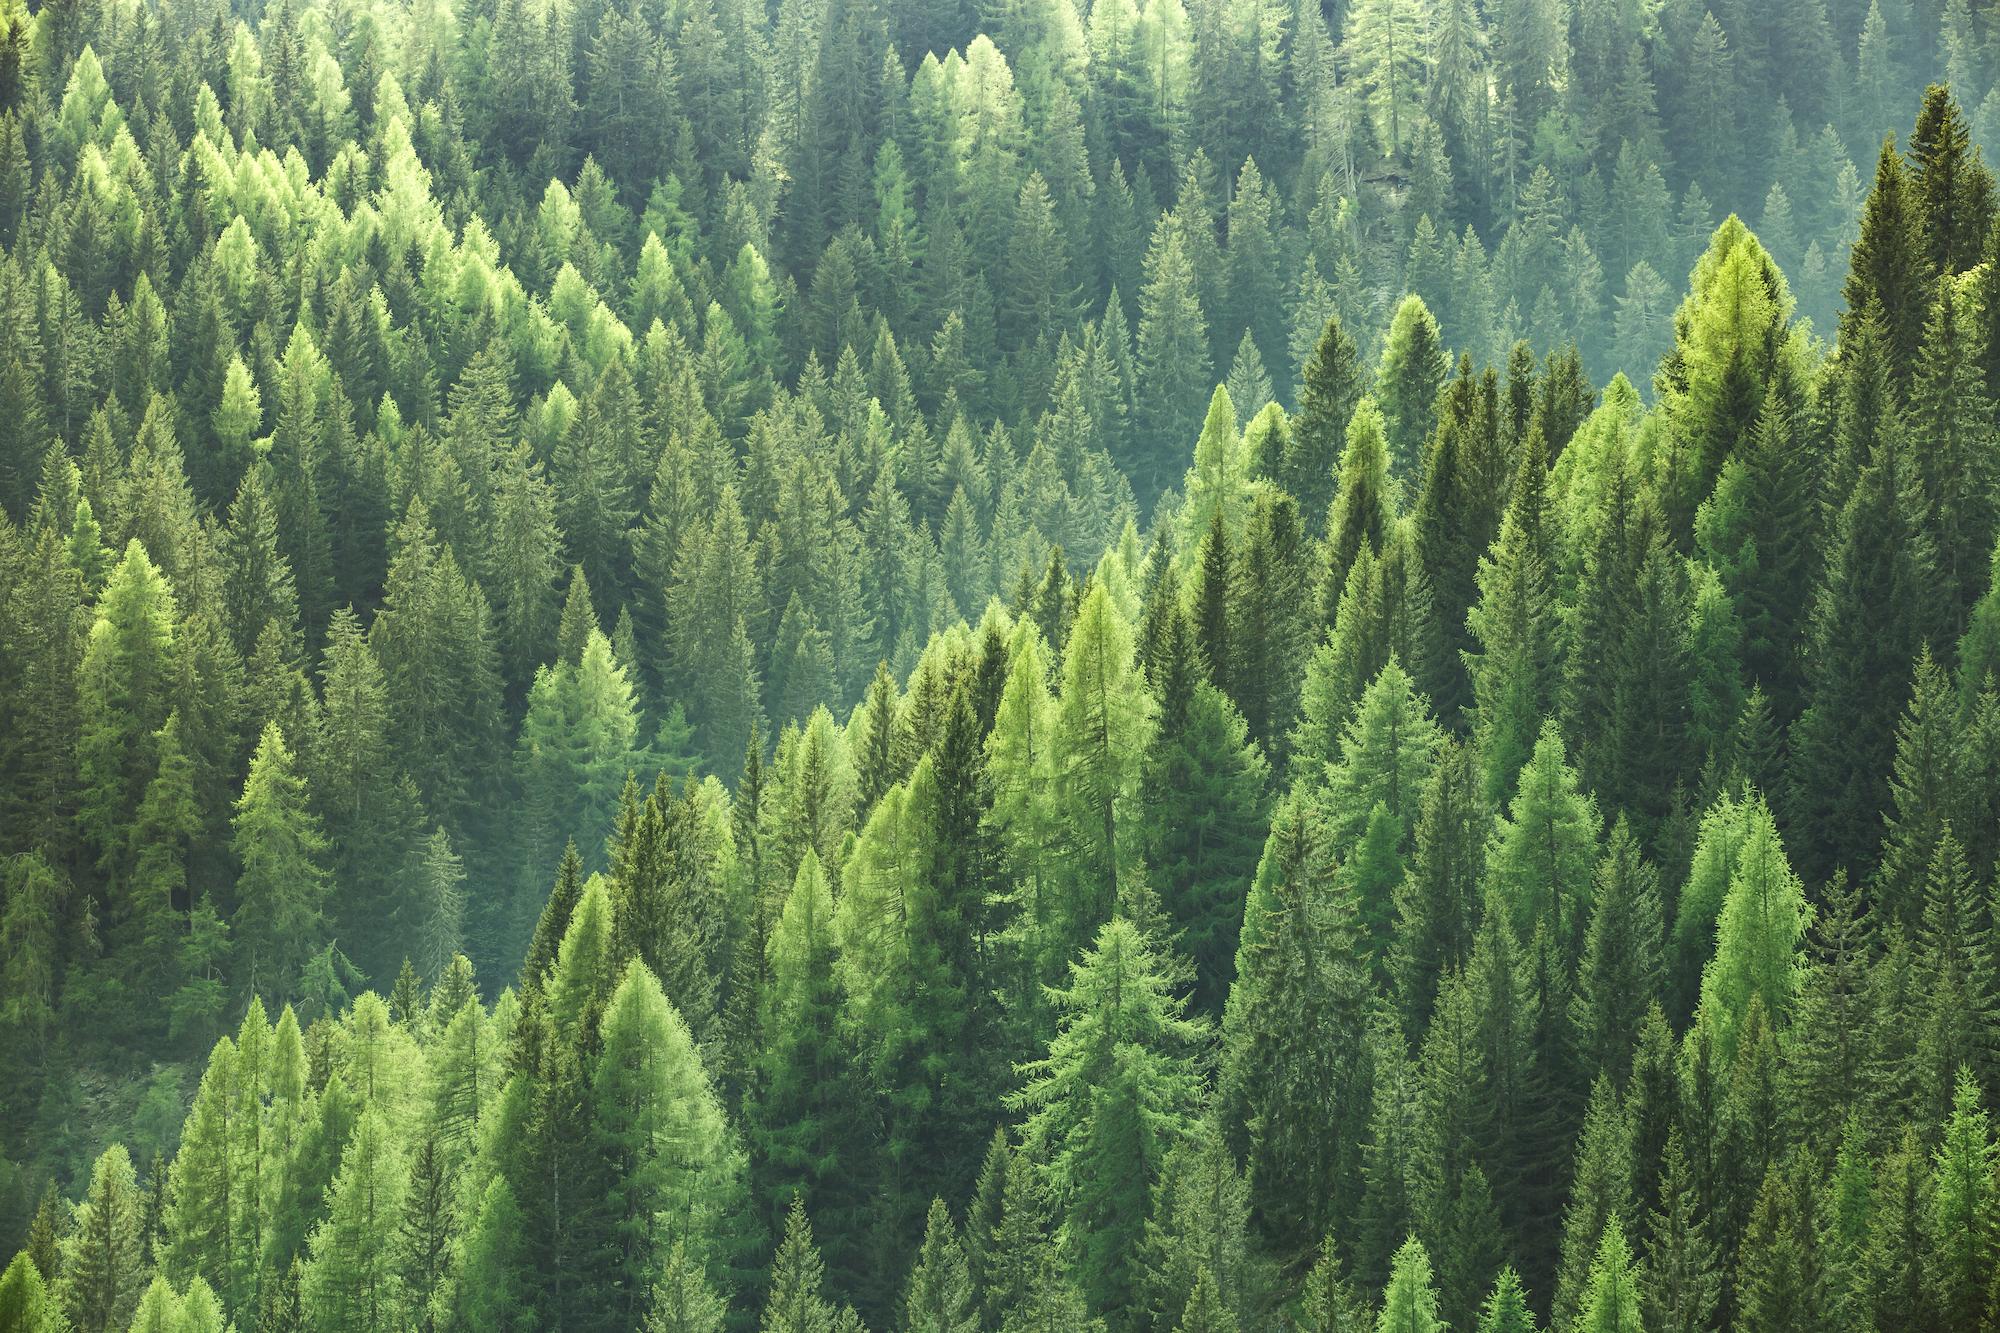 Birds eye view of evergreen treetops in a forest